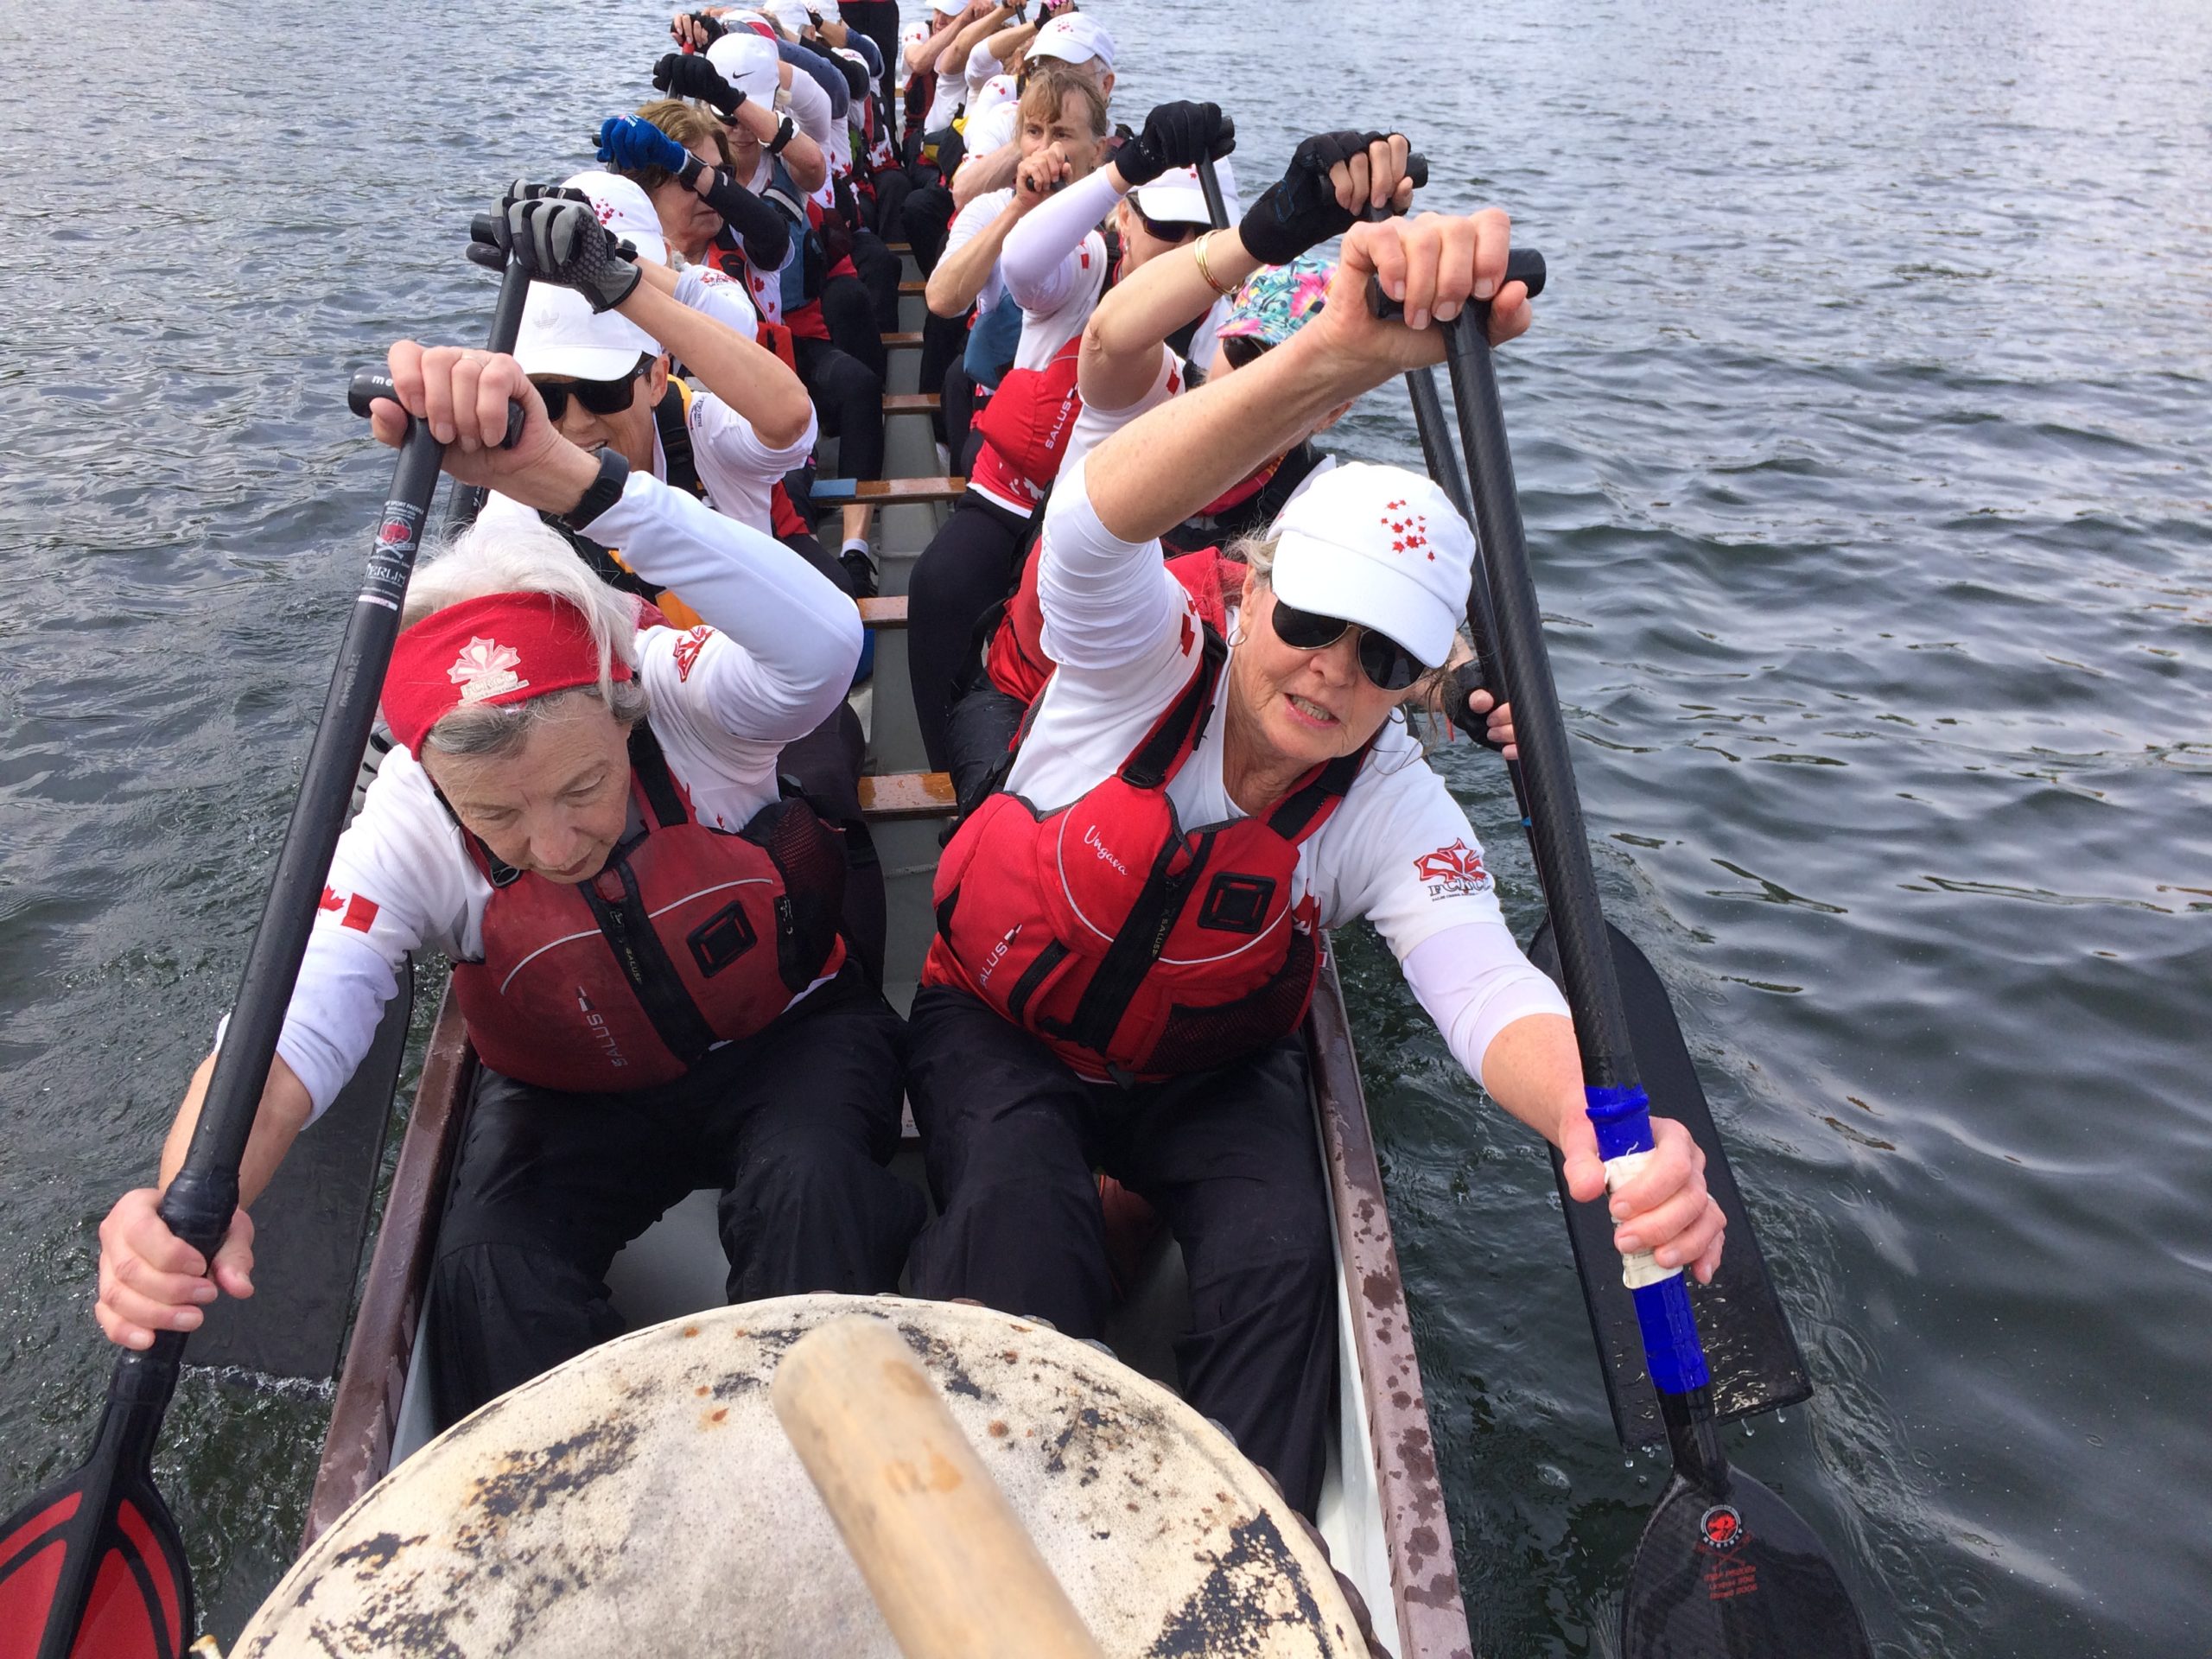 paddles up during dragon boat regatta and ready to race. looking at team from drummer seat